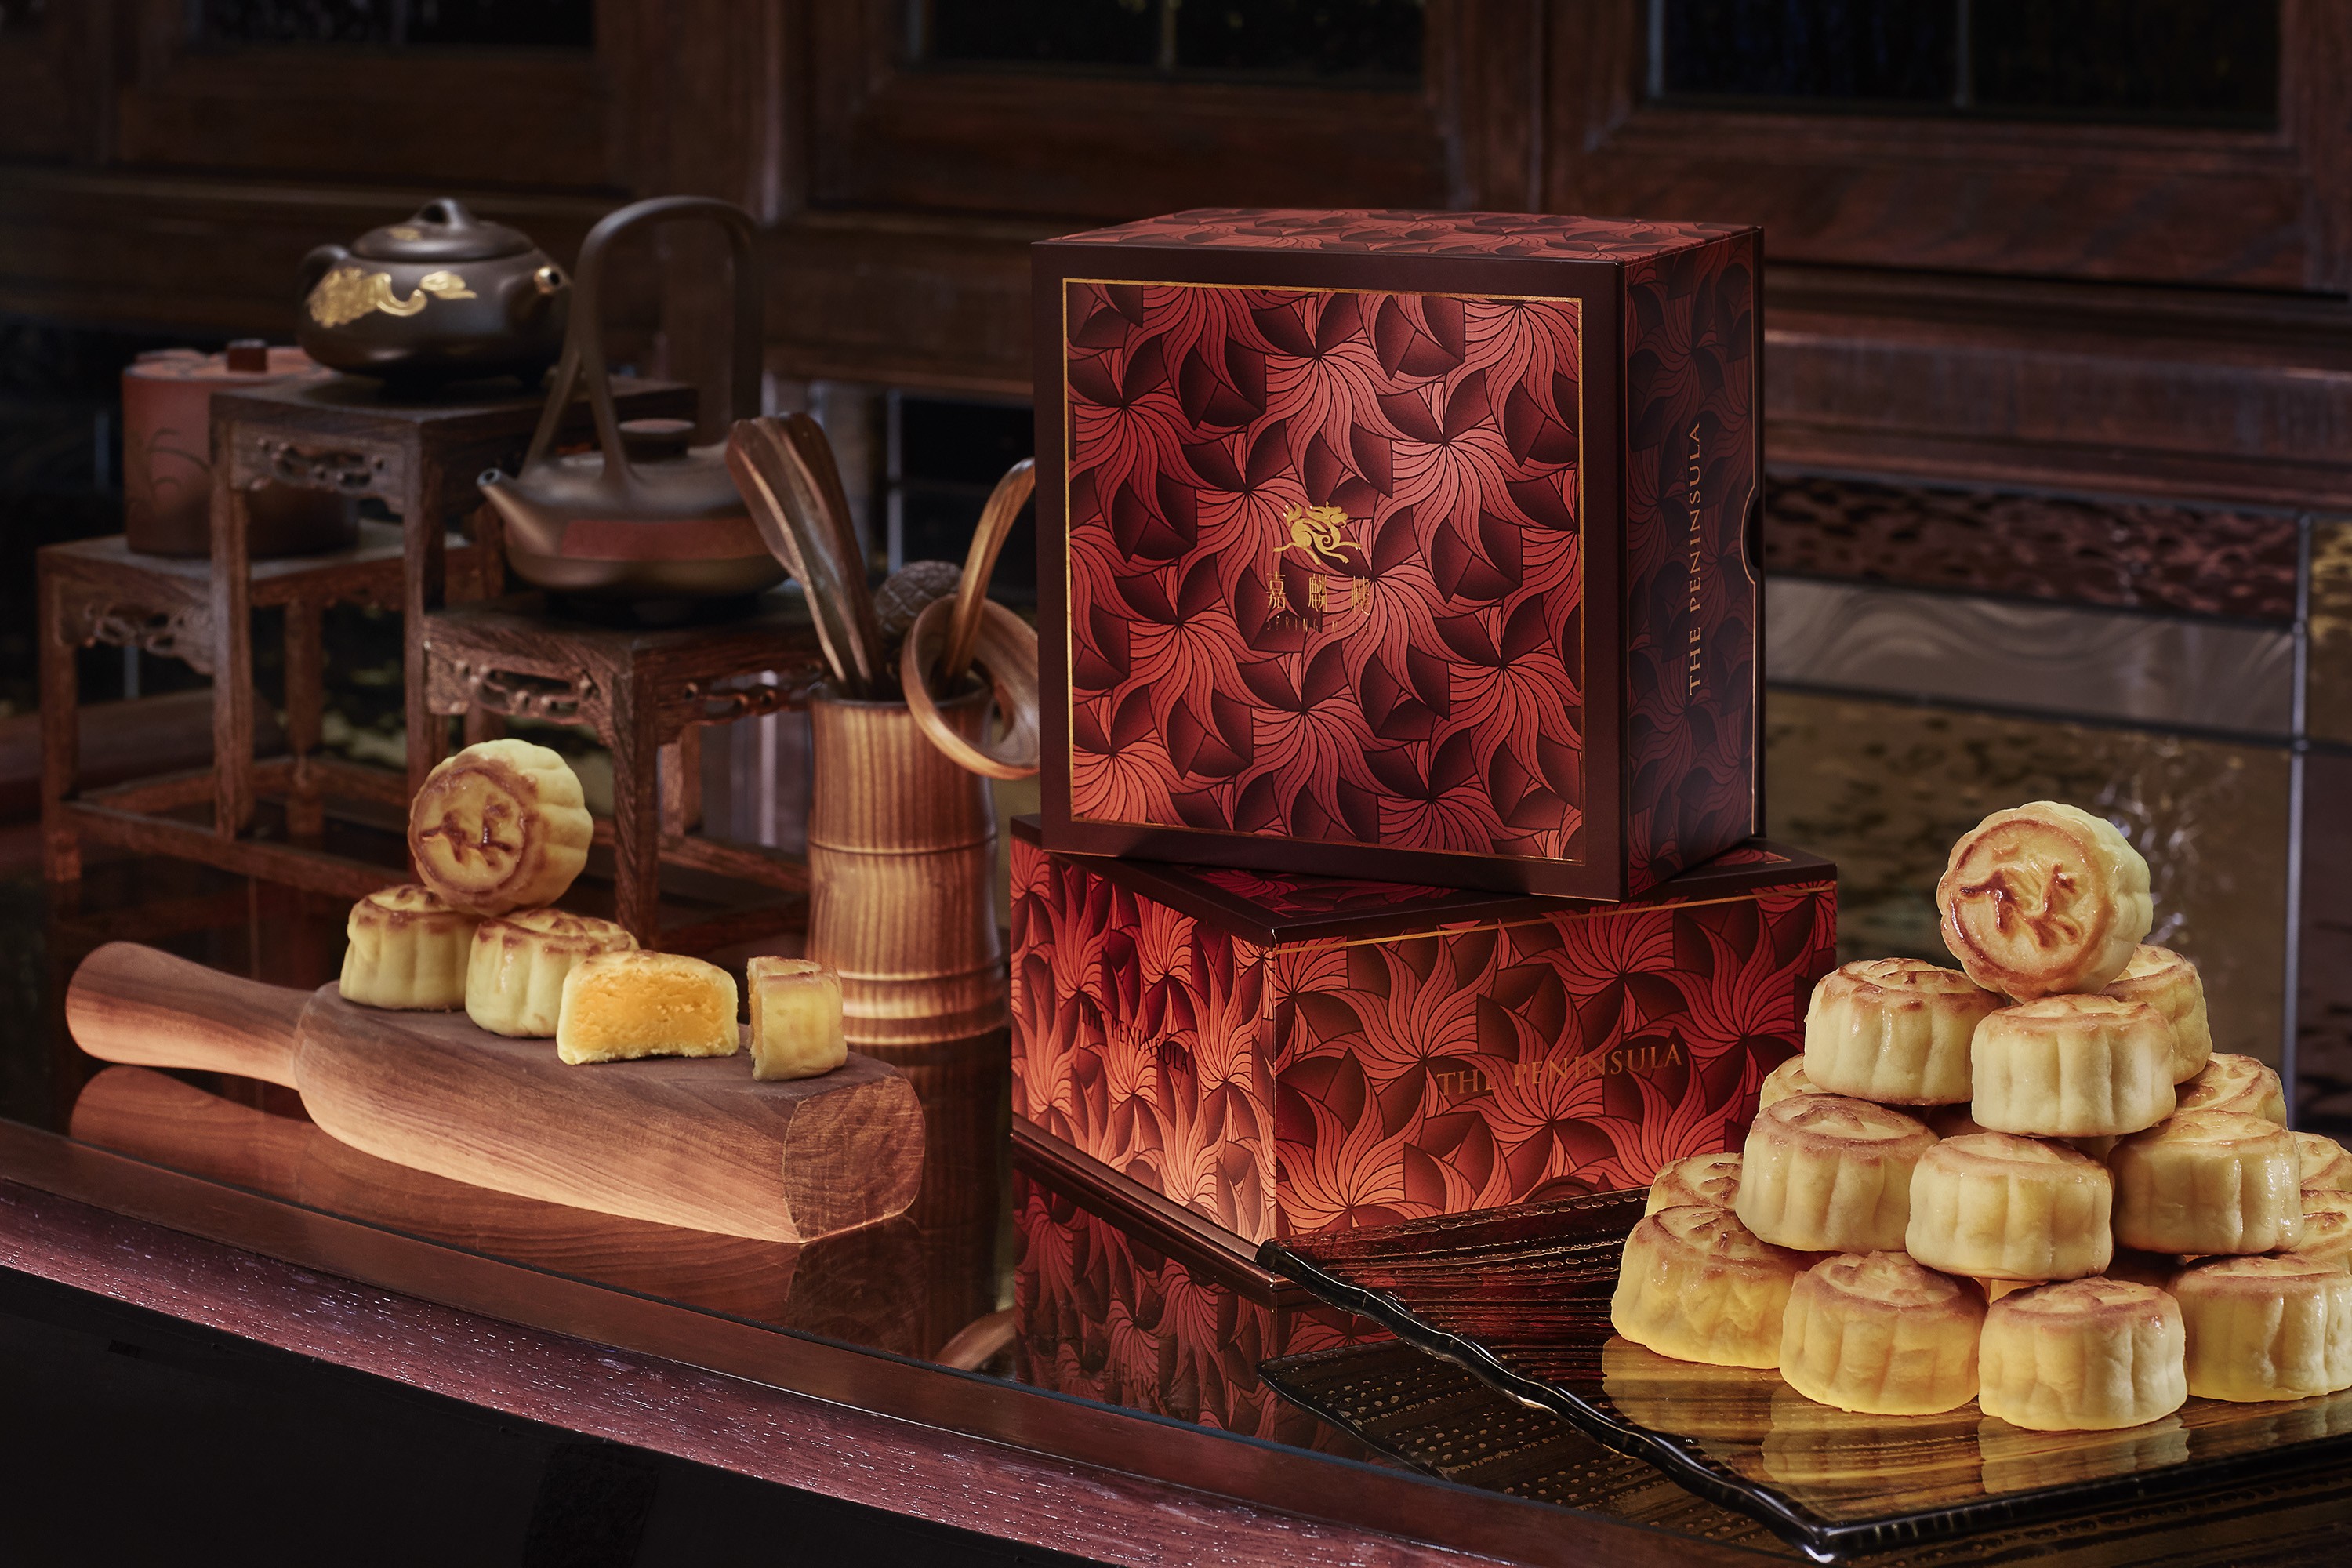 The Peninsula’s Spring Moon is famous for its mini-egg custard mooncakes.